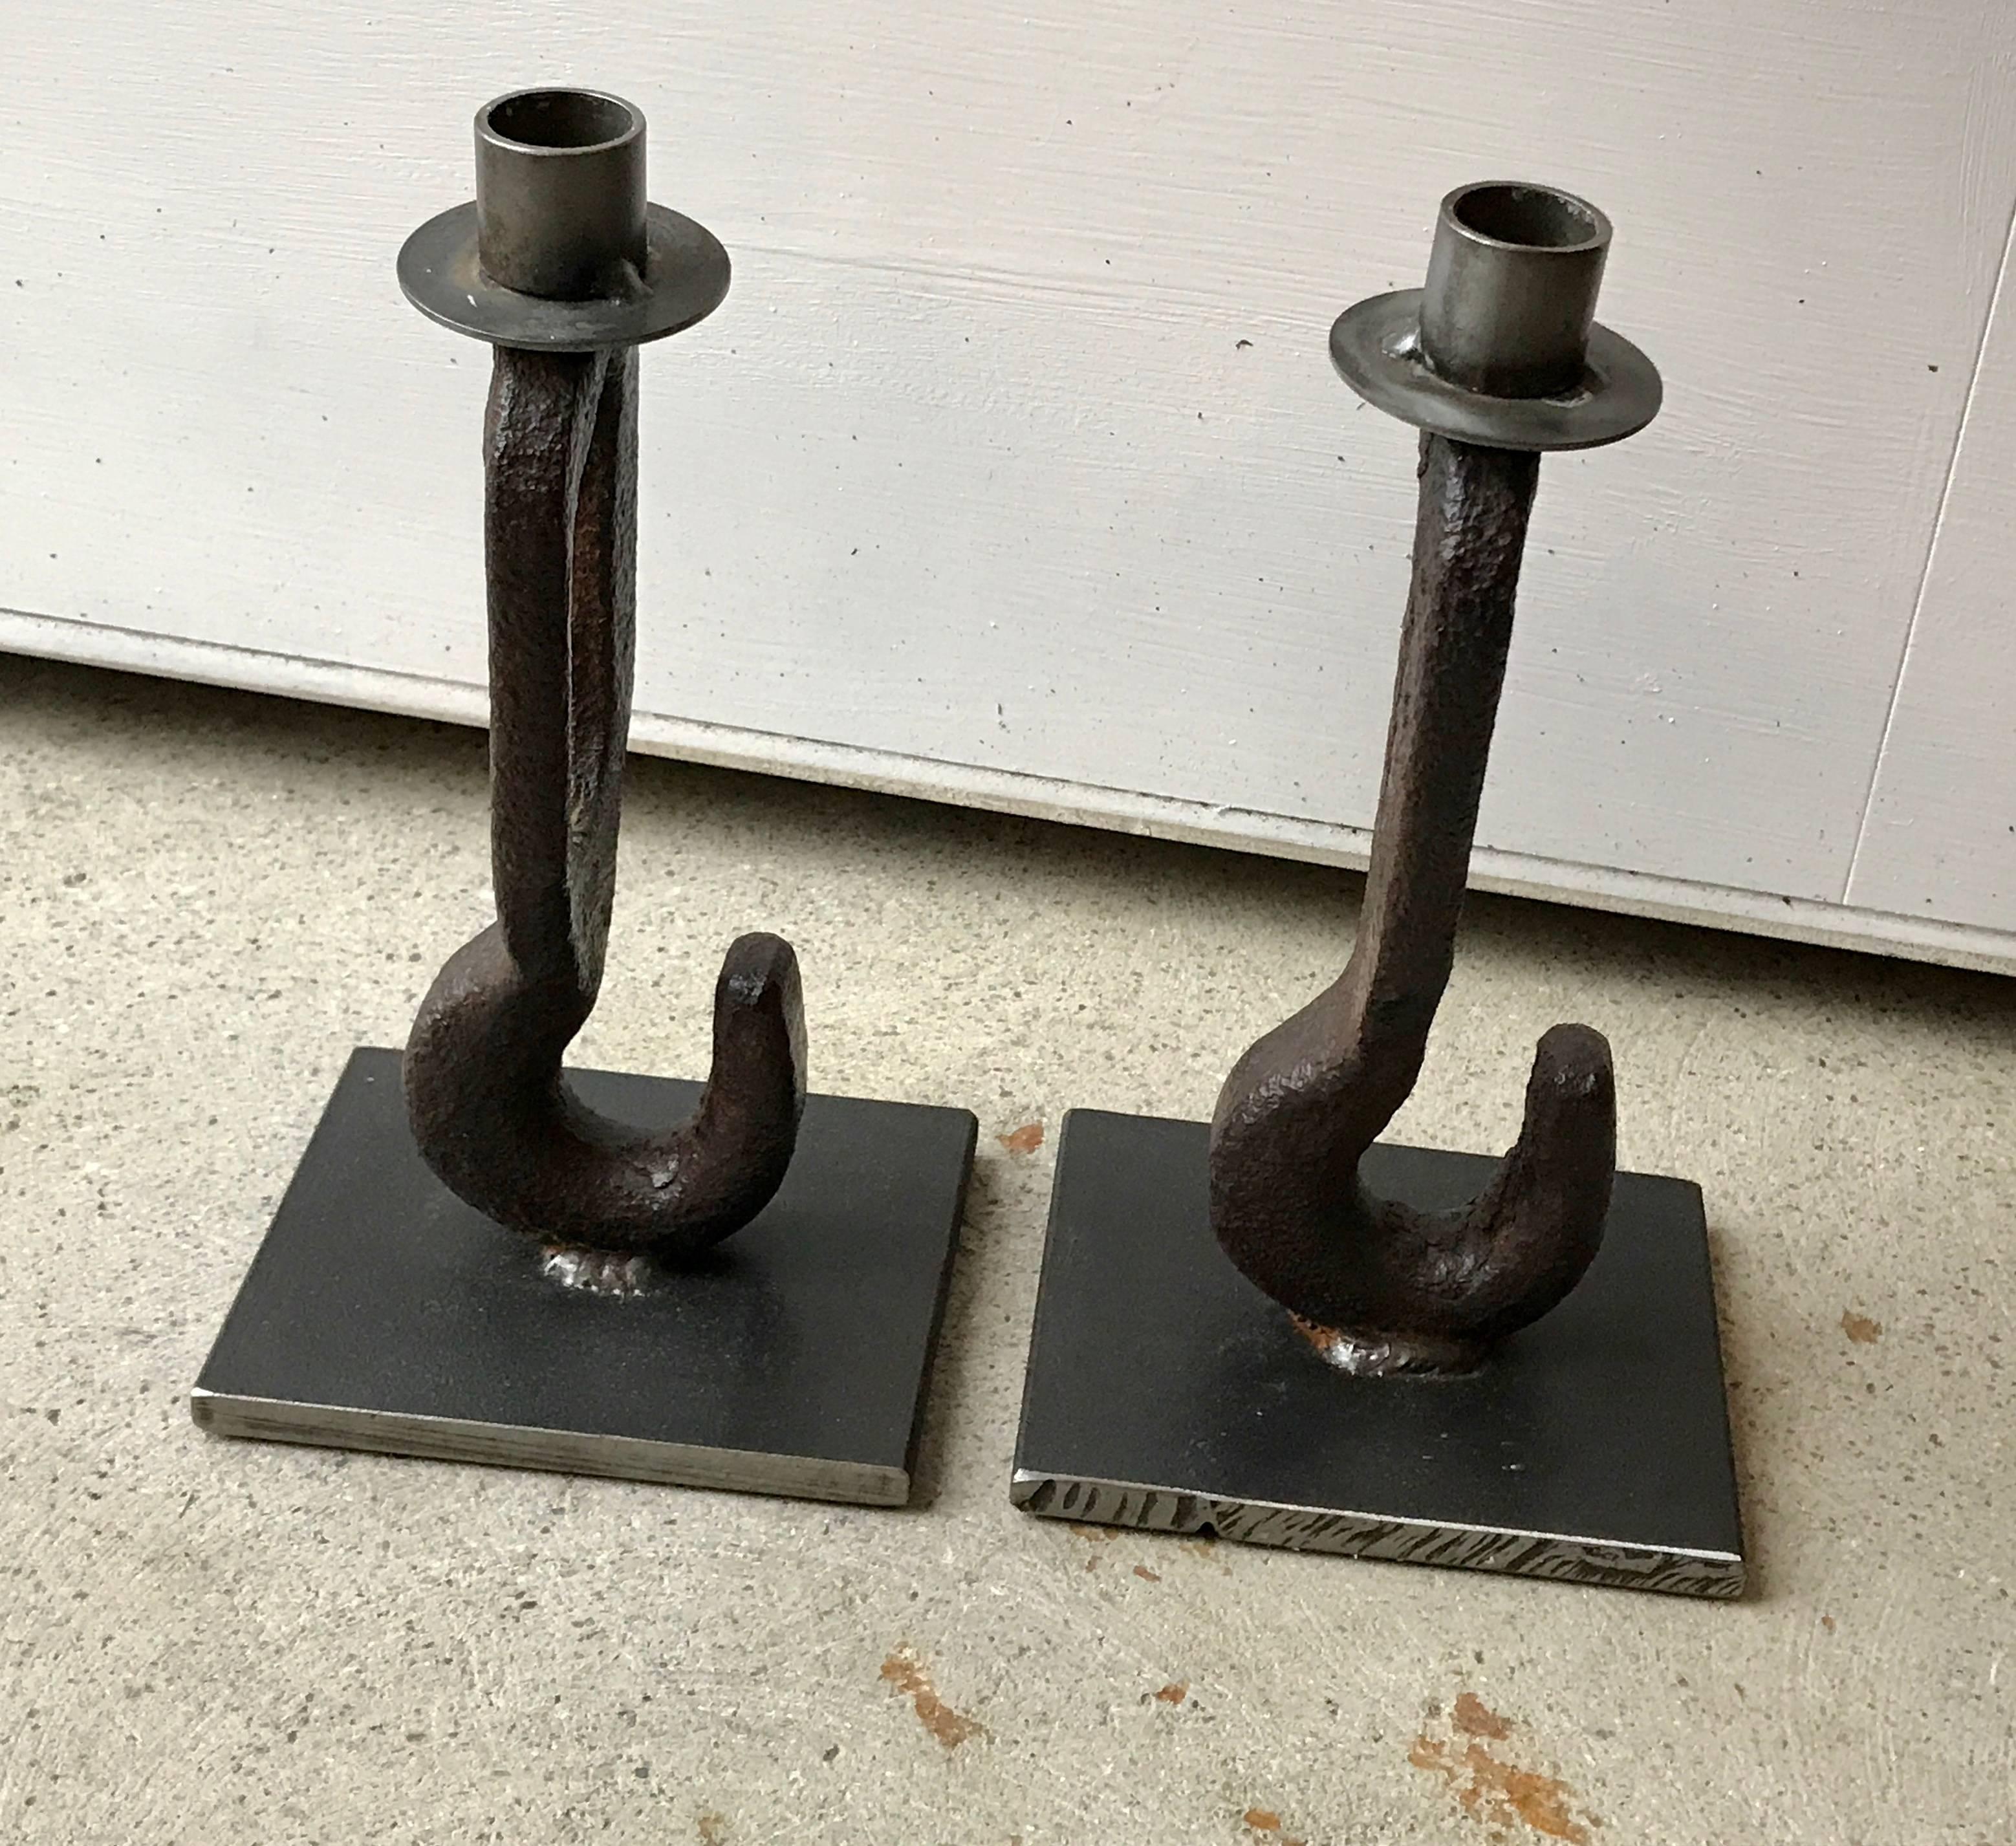 Brutalist Industrial Steel Candlestick Holders by American Artist Breck Armstrong